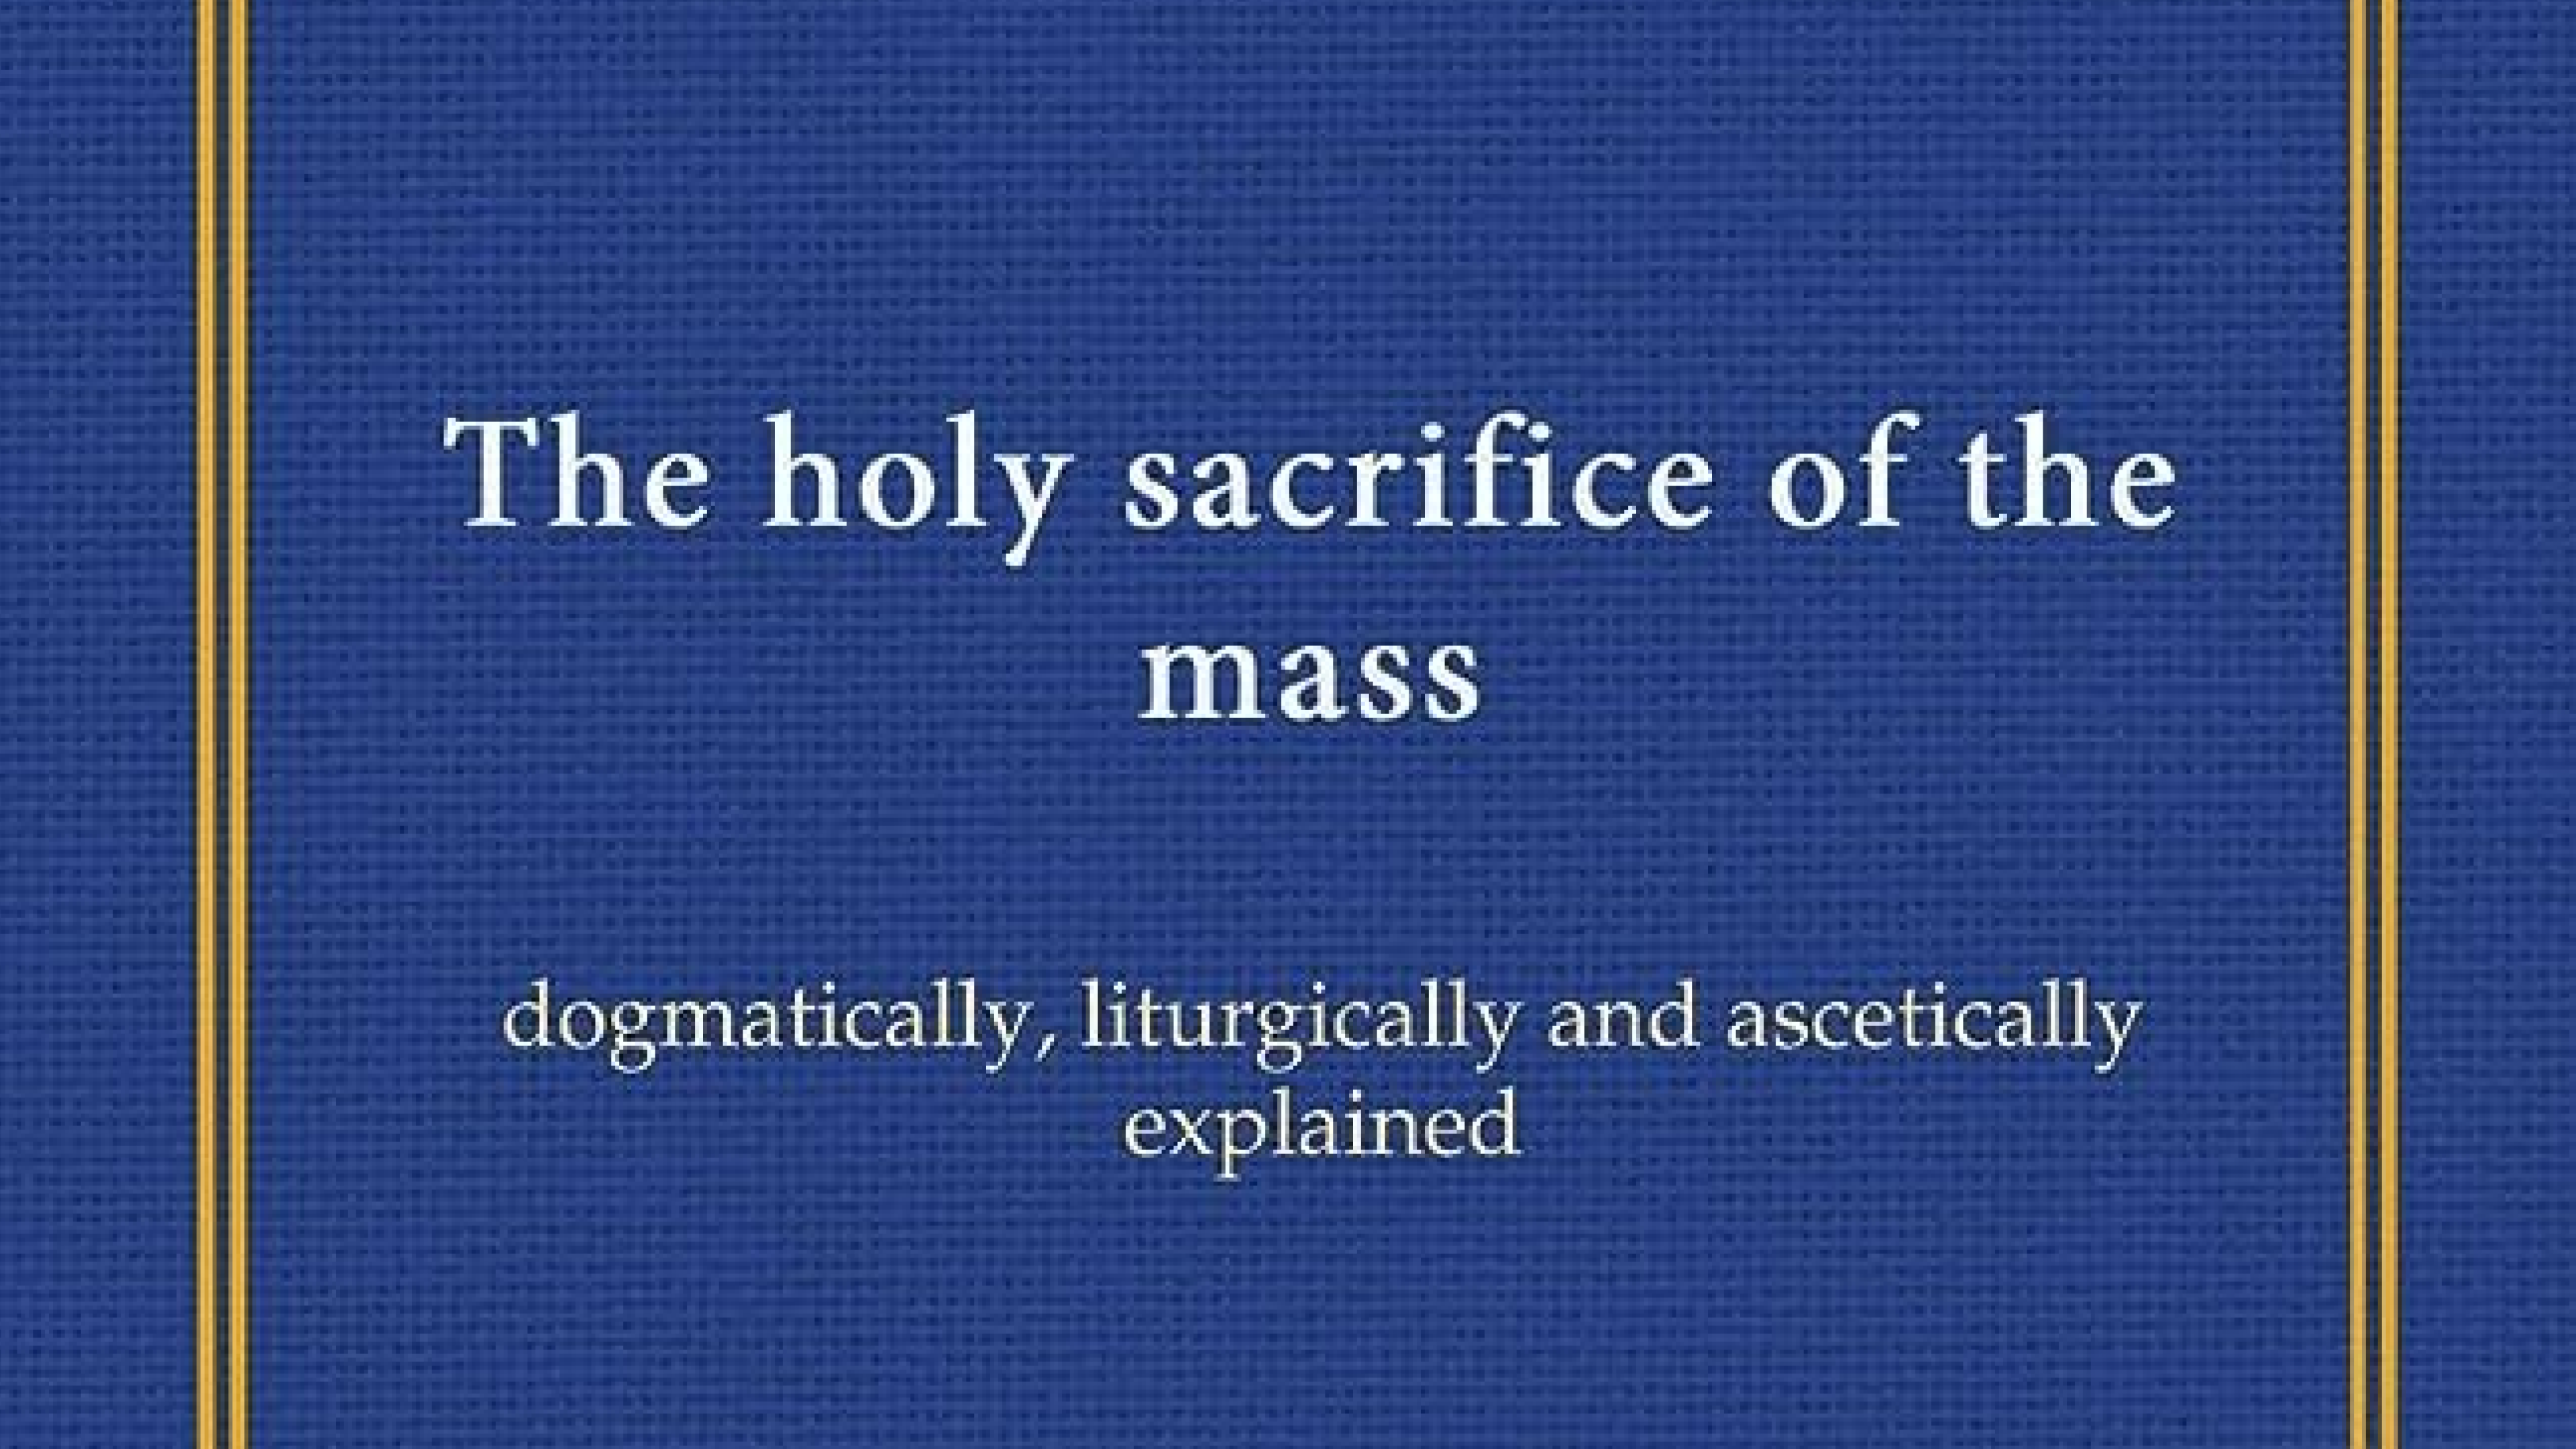 The Holy Sacrifice of the Mass, Dogmatically, Liturgically and Ascetically Explained by Rev. Nicholas Gihr